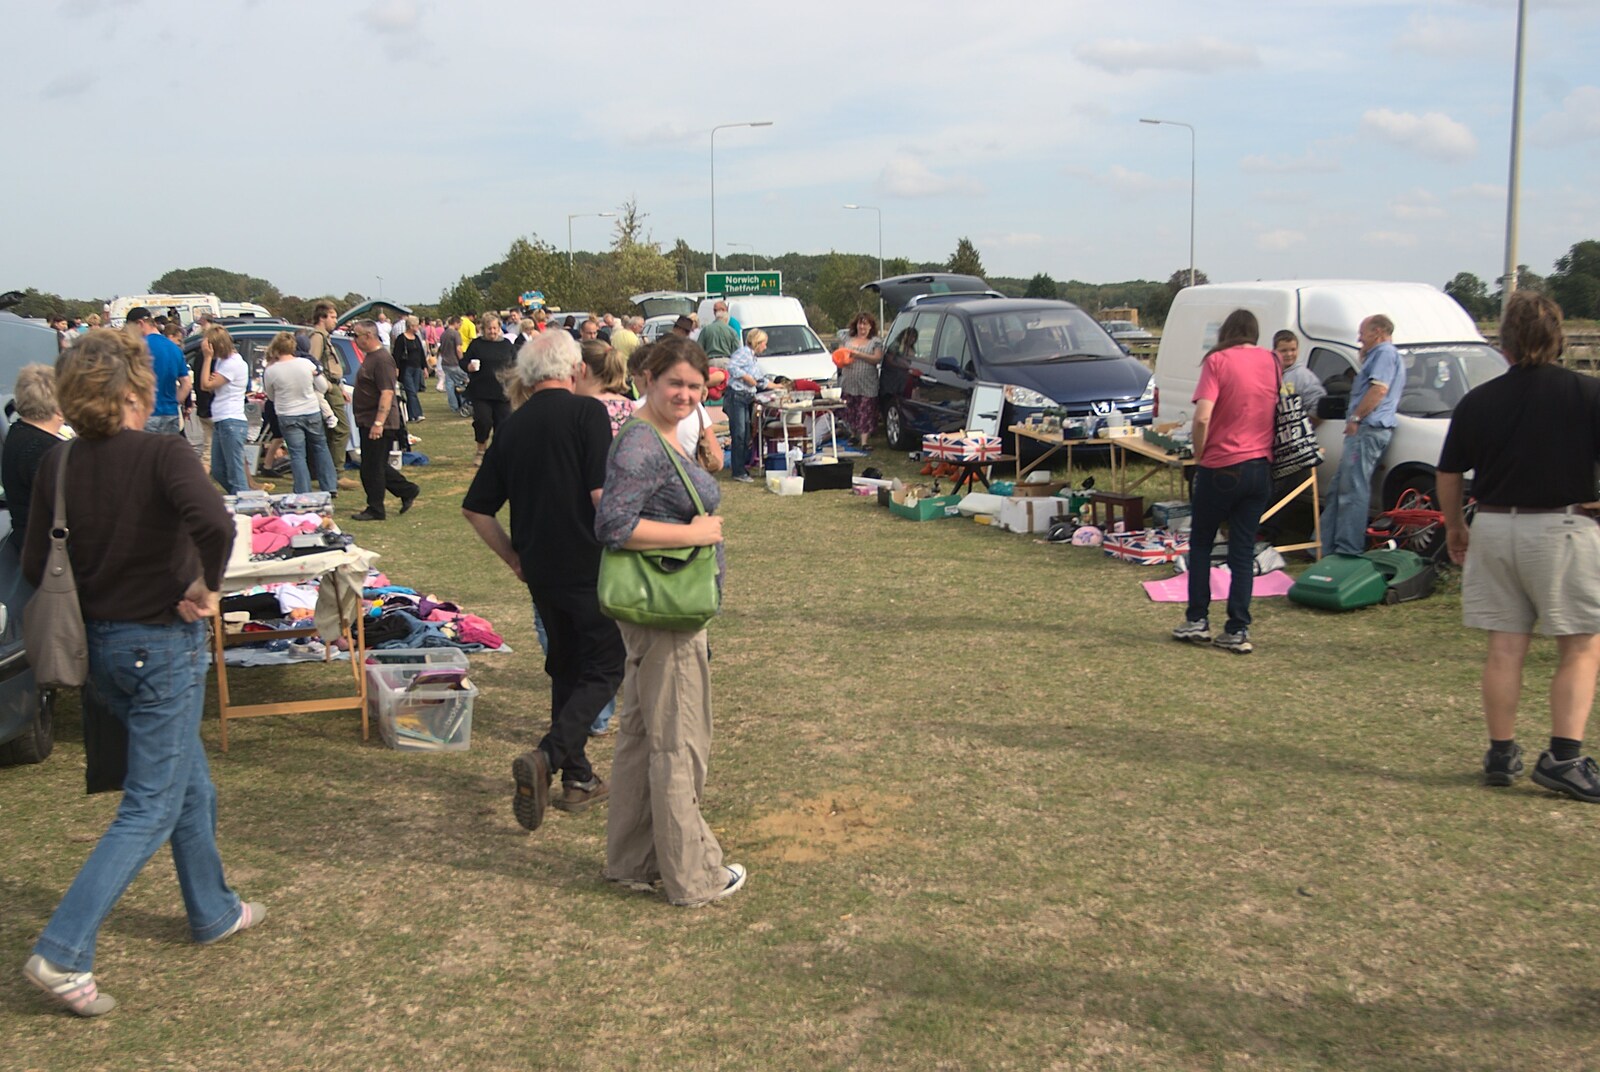 Isobel at a Car Boot sale on the A11 from Fred's Birthday and Mildenhall Camping, Suffolk - 25th September 2011